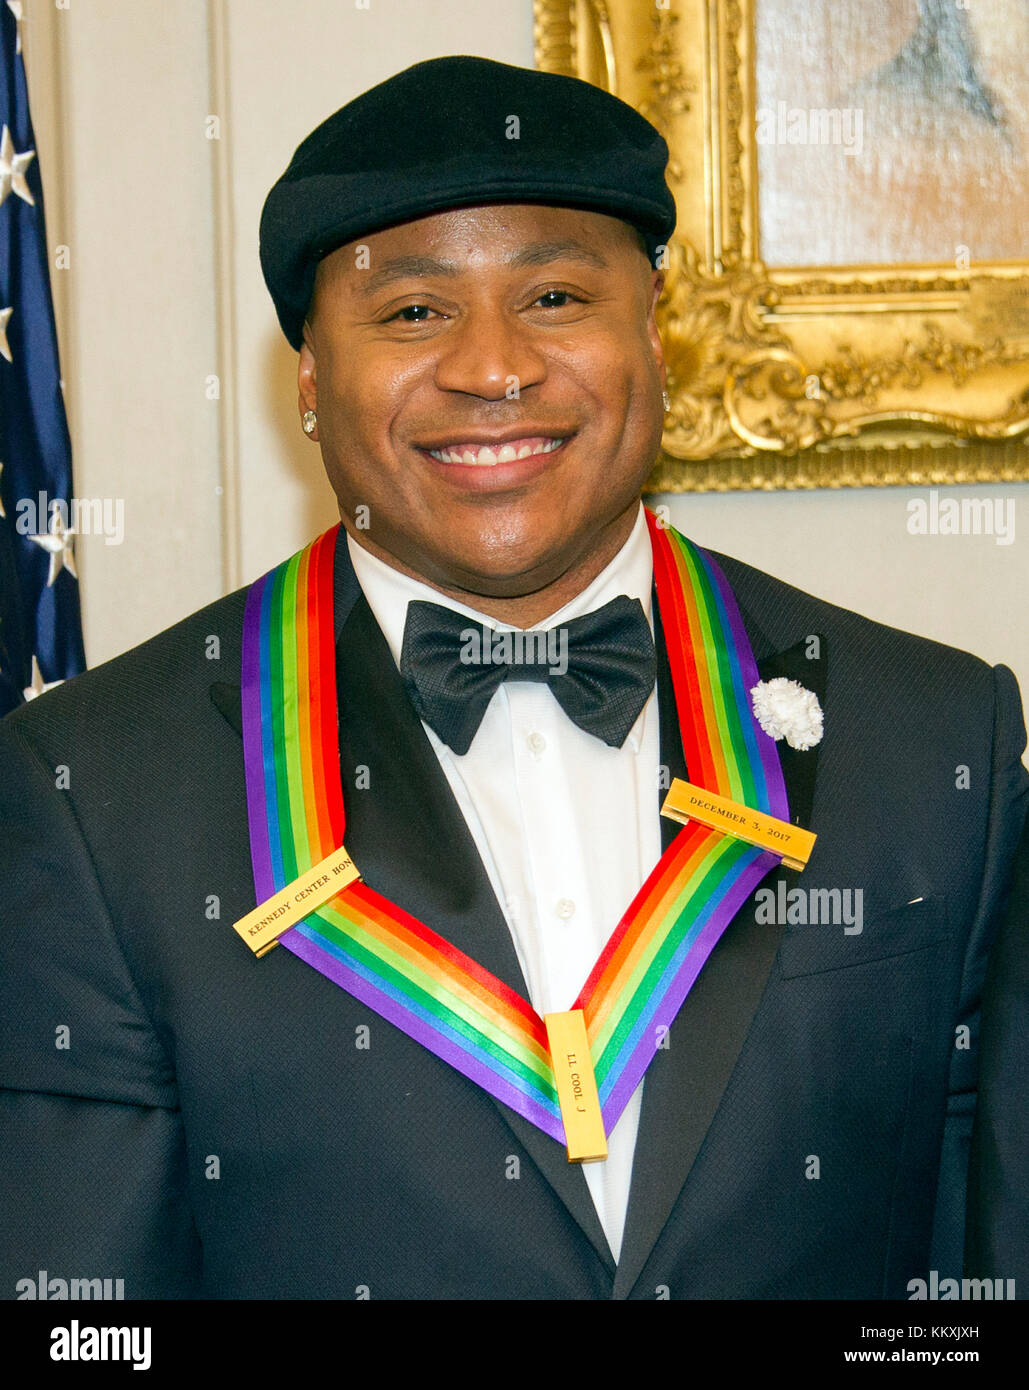 LL COOL J, one of he five recipients of the 40th Annual Kennedy Center Honors with his award as he poses for a group photo following a dinner hosted by United States Secretary of State Rex Tillerson in their honor at the US Department of State in Washington, DC on Saturday, December 2, 2017. The 2017 honorees are: American dancer and choreographer Carmen de Lavallade; Cuban American singer-songwriter and actress Gloria Estefan; American hip hop artist and entertainment icon LL COOL J; American television writer and producer Norman Lear; and American musician and record producer Lionel Richie Stock Photo